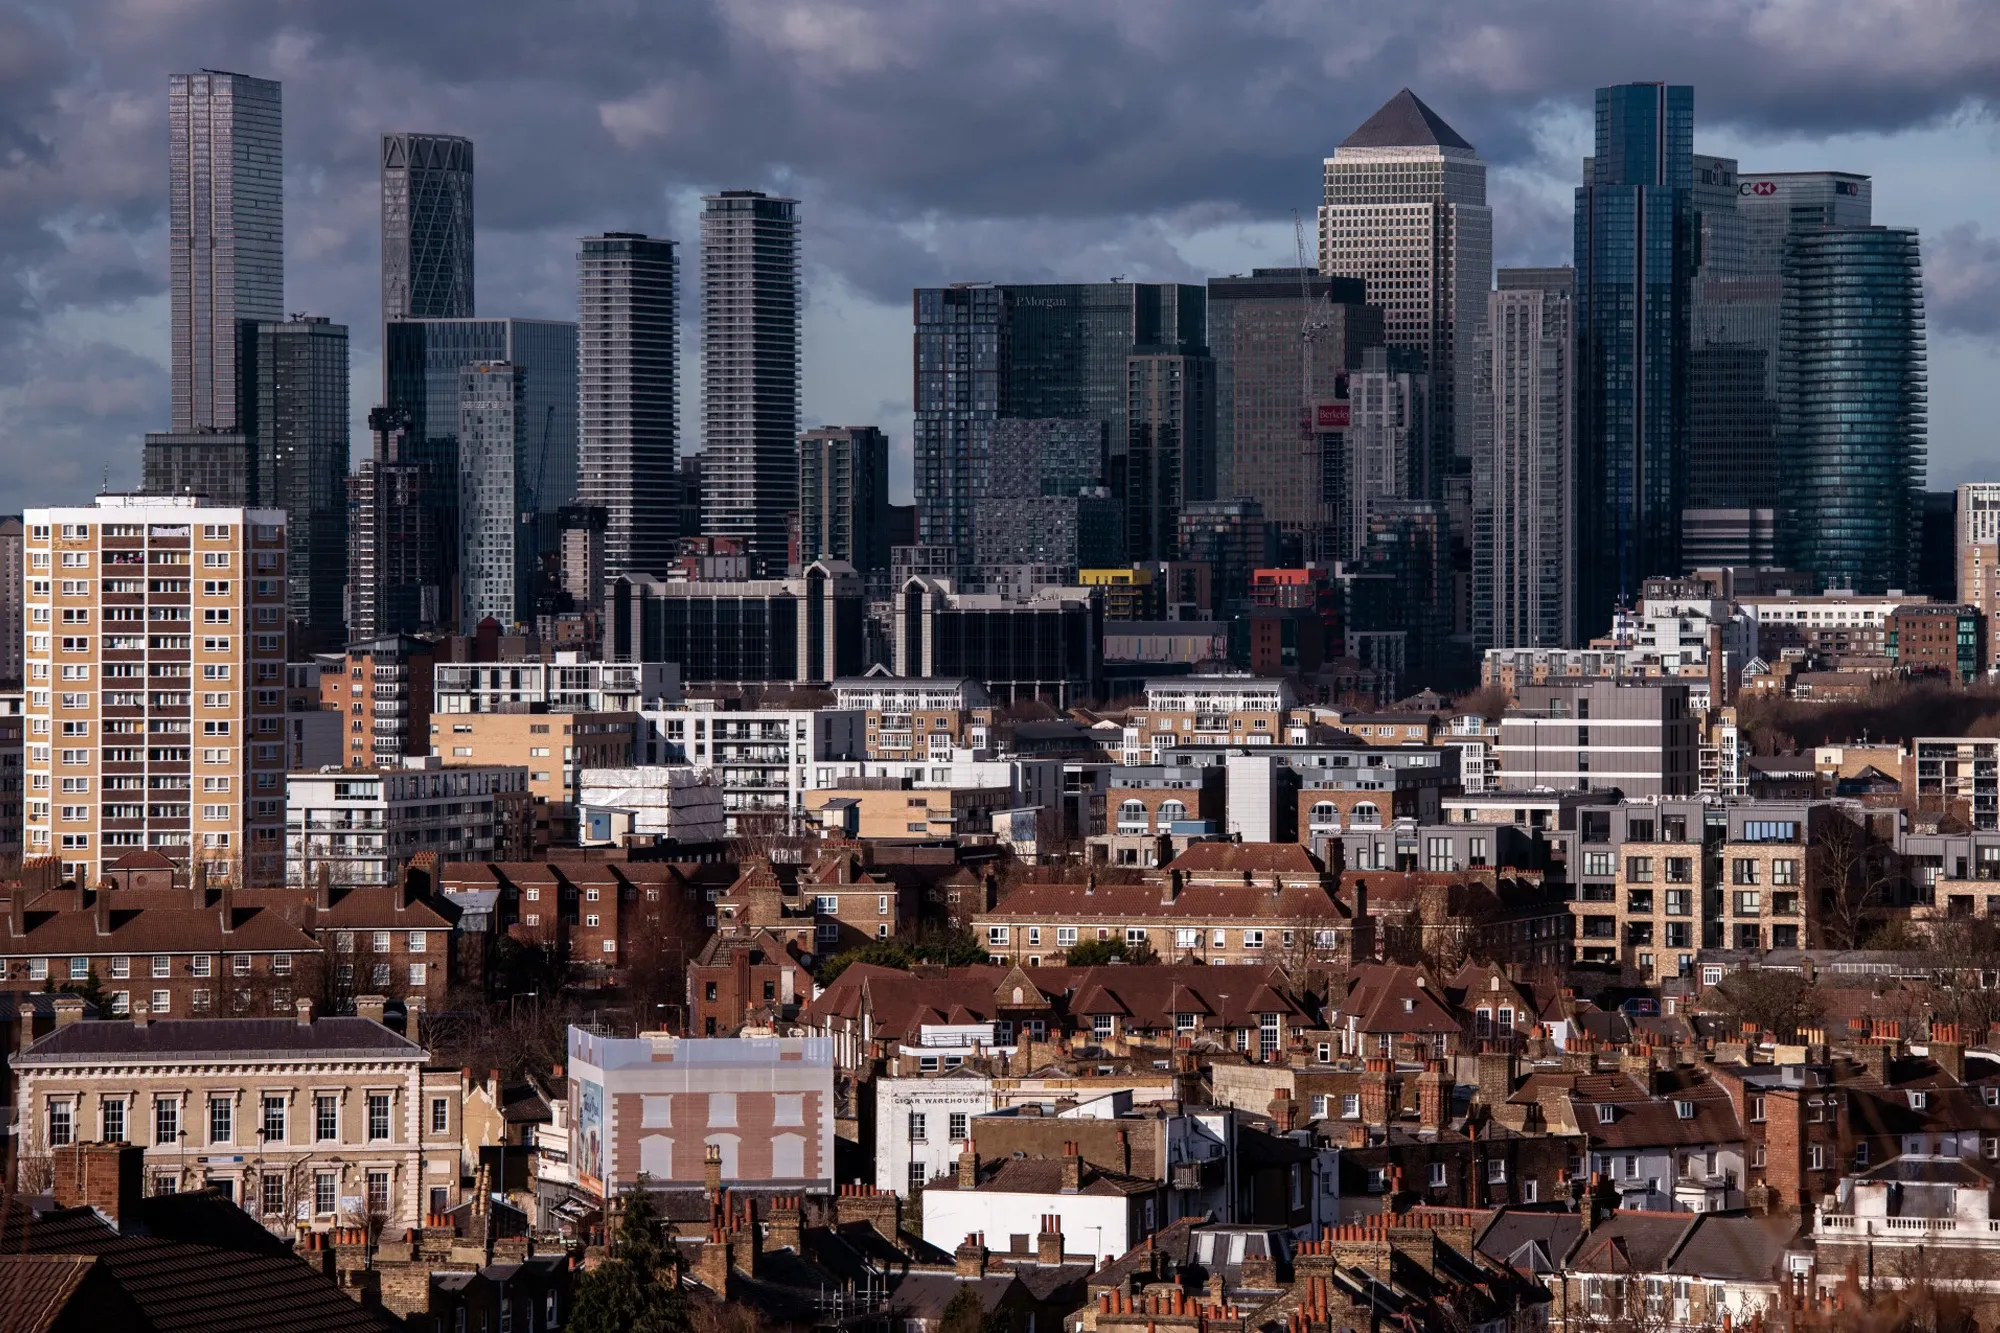  The densely populated Canary Wharf district from the south peninsula.